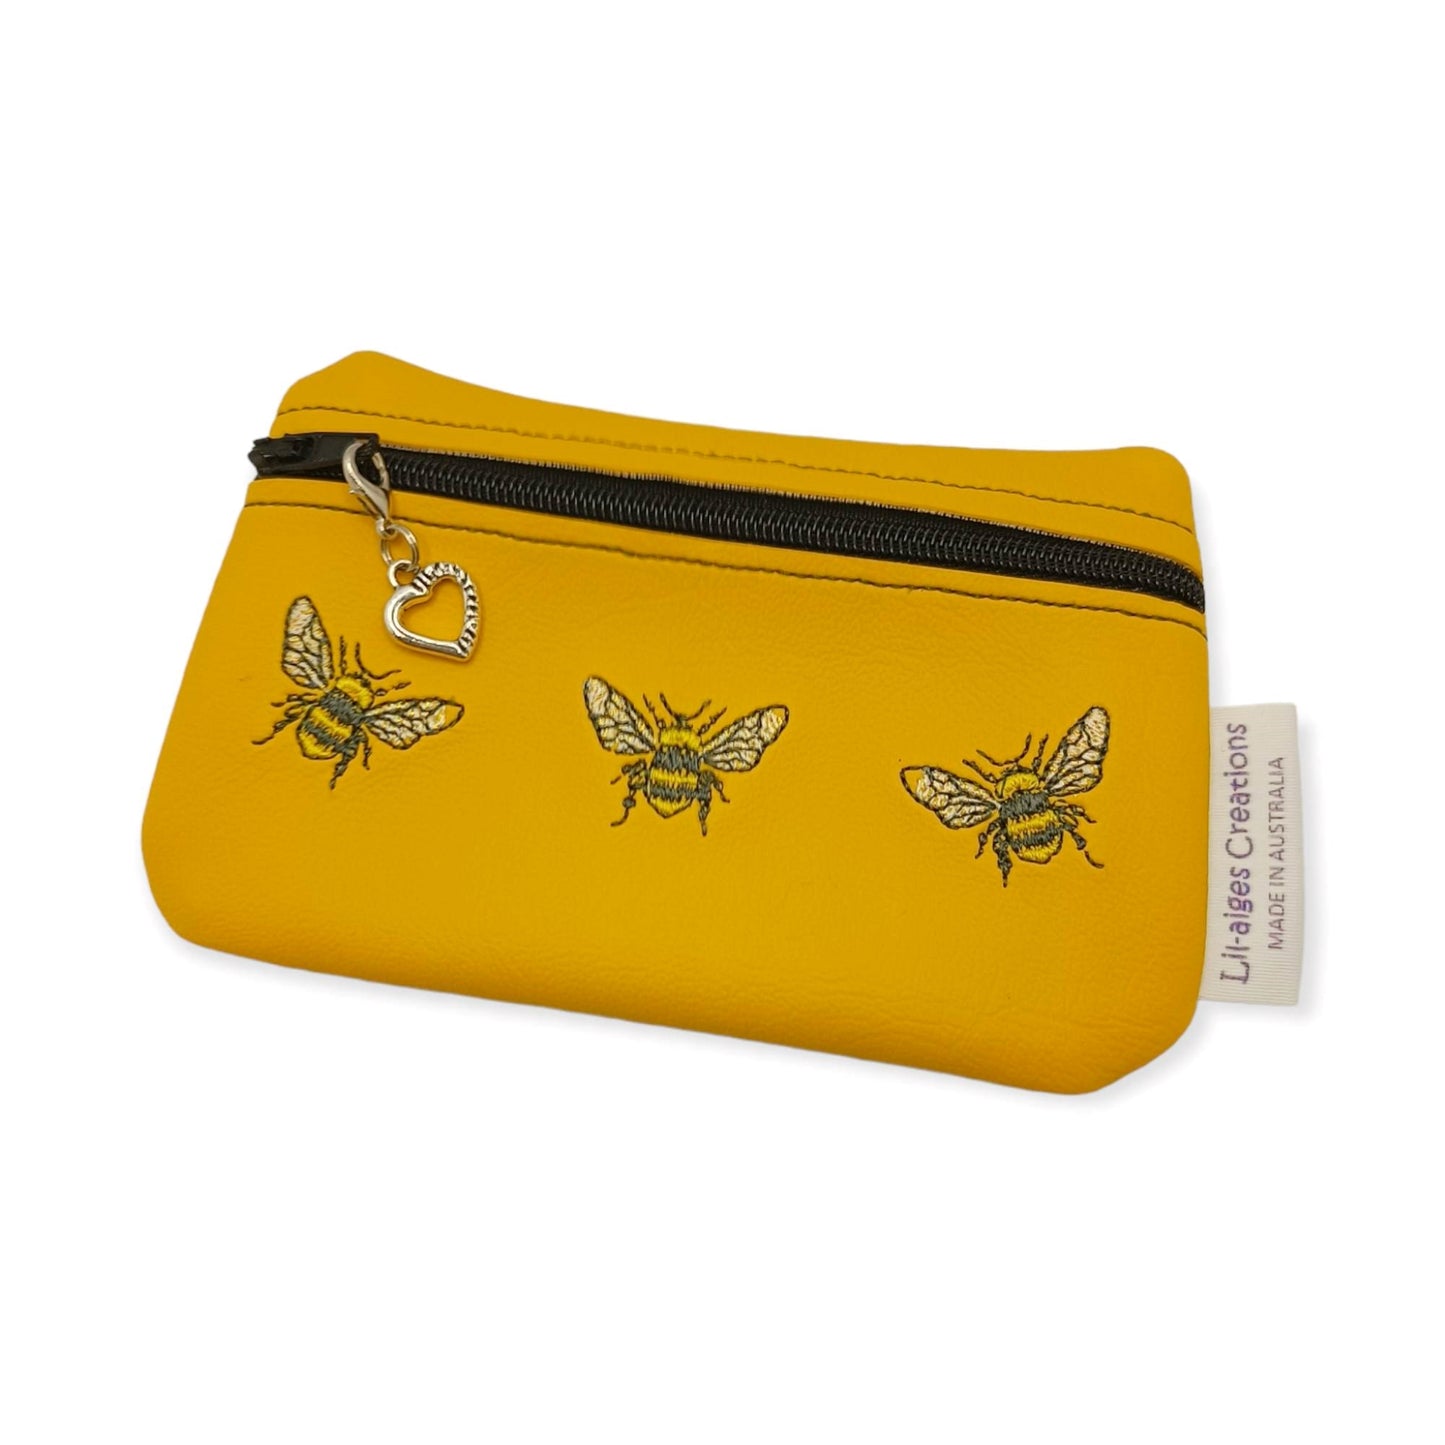 Bee Themed Gift Pack #1 | Lip Balm Holder, Coin Purse, Keychain | Made in Australia